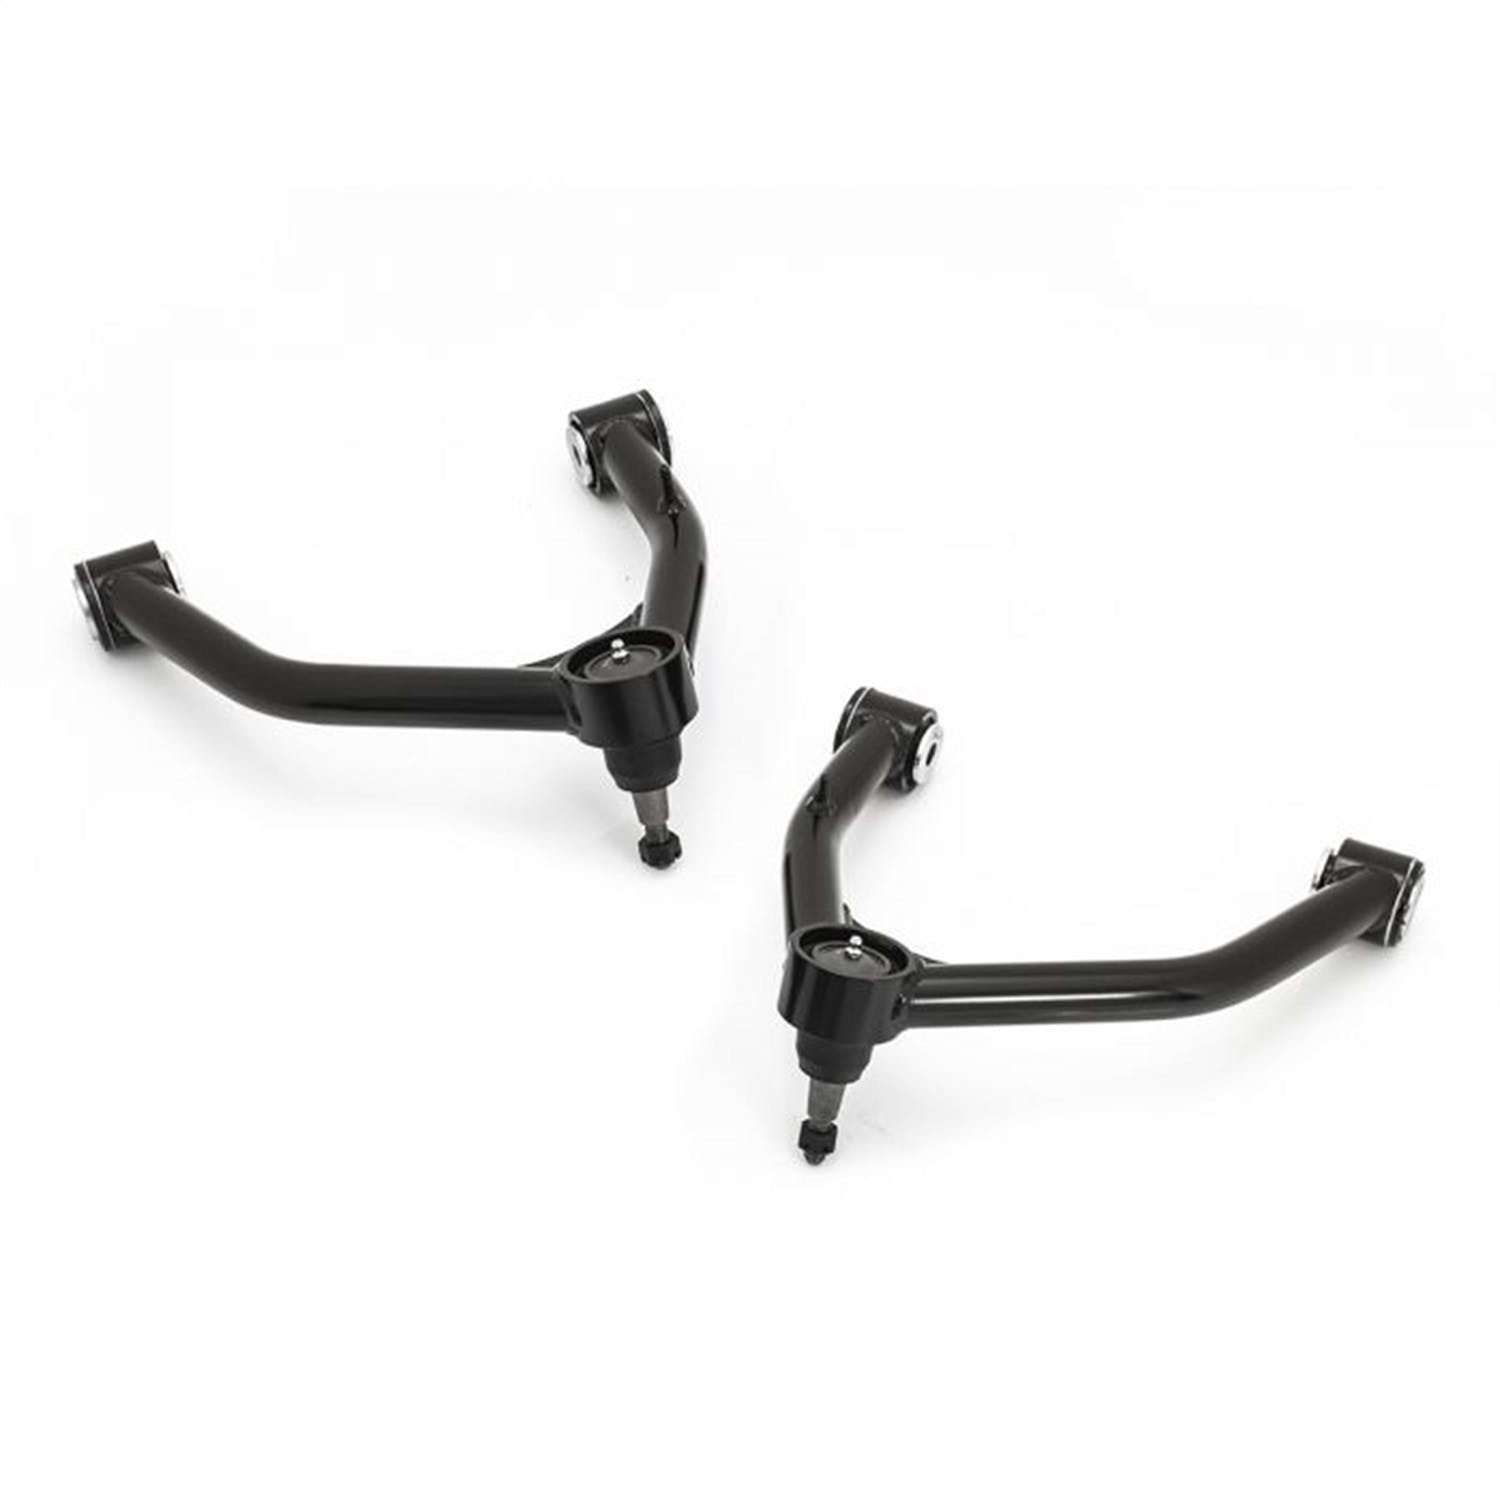 ReadyLIFT 67-3500 Upper Control Arms for 2.25" Leveling and 7-9" Big Lift Kits